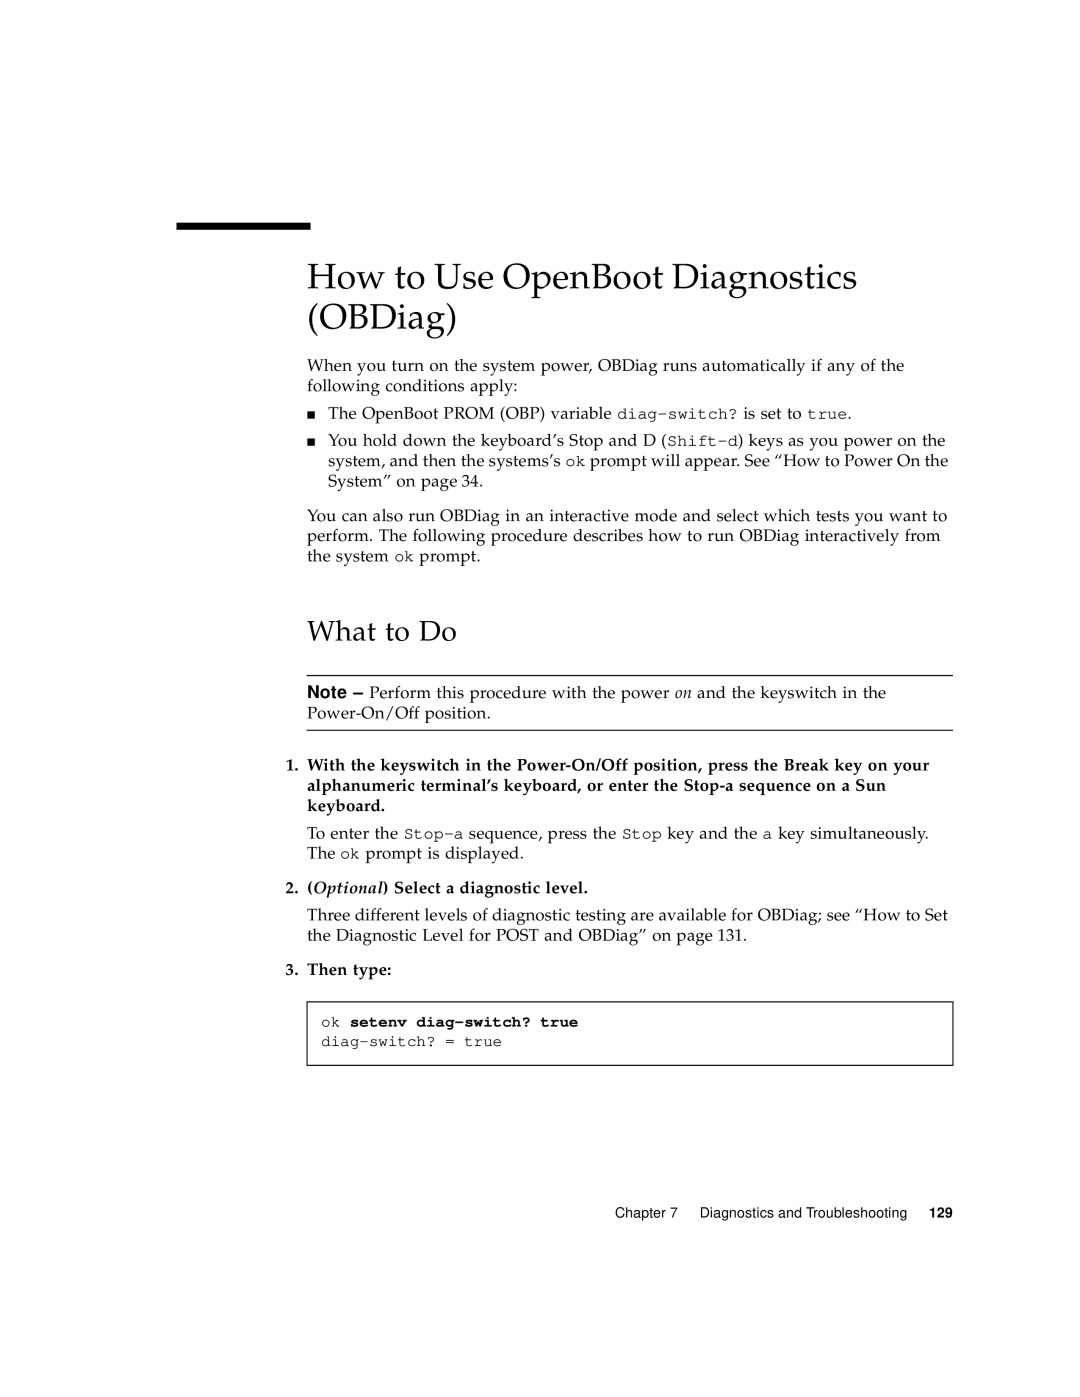 Sun Microsystems 220R How to Use OpenBoot Diagnostics OBDiag, Optional Select a diagnostic level, Then type, What to Do 